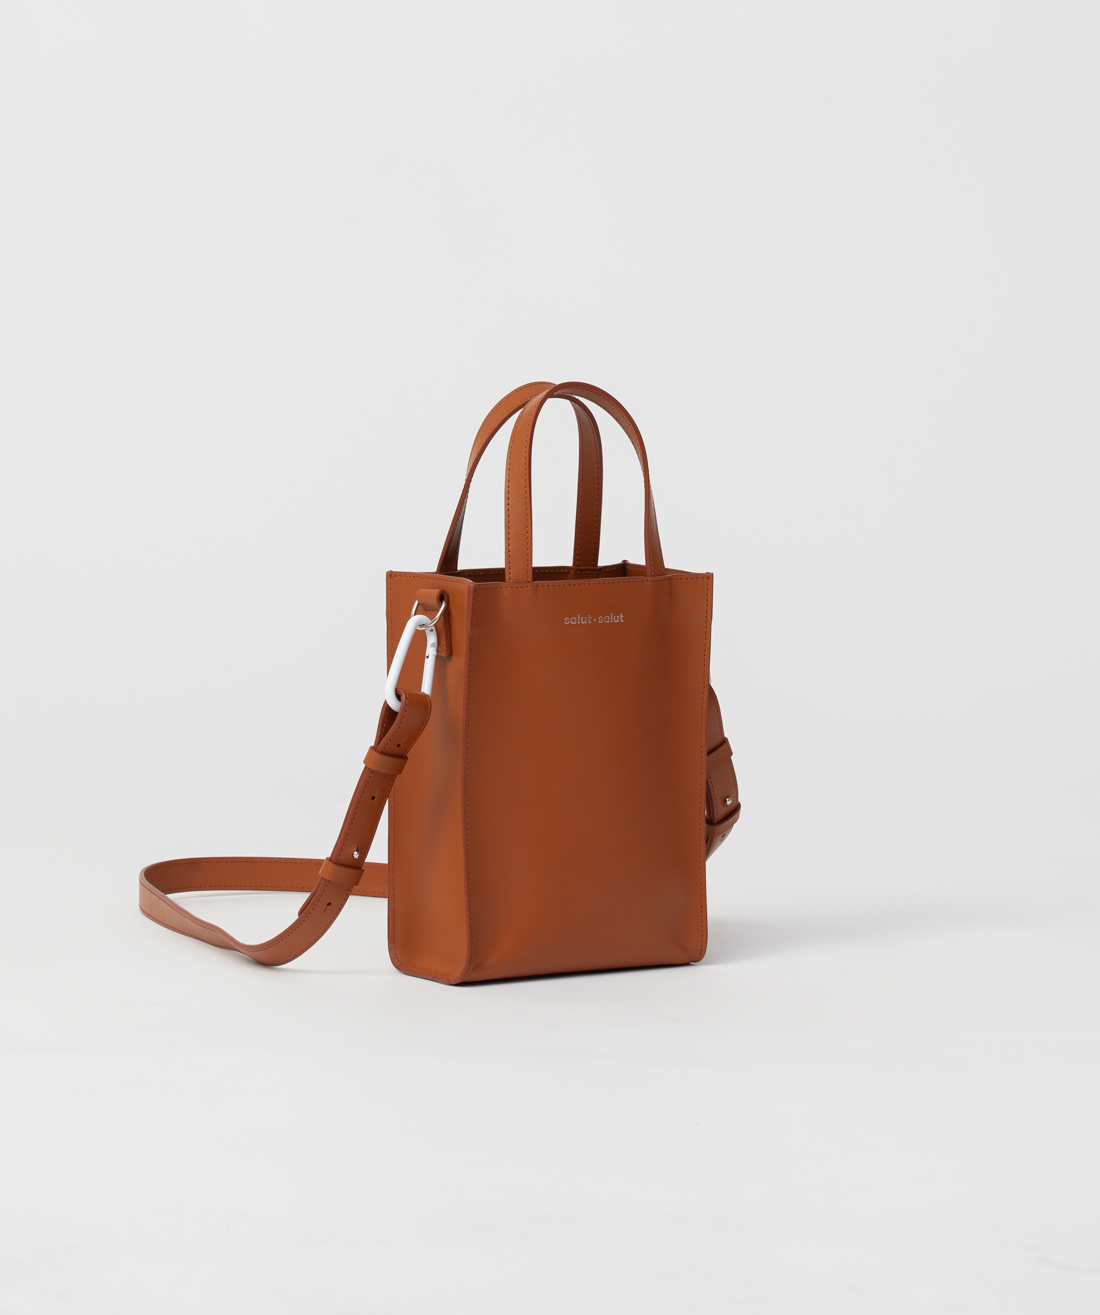 Small Tote in Camel